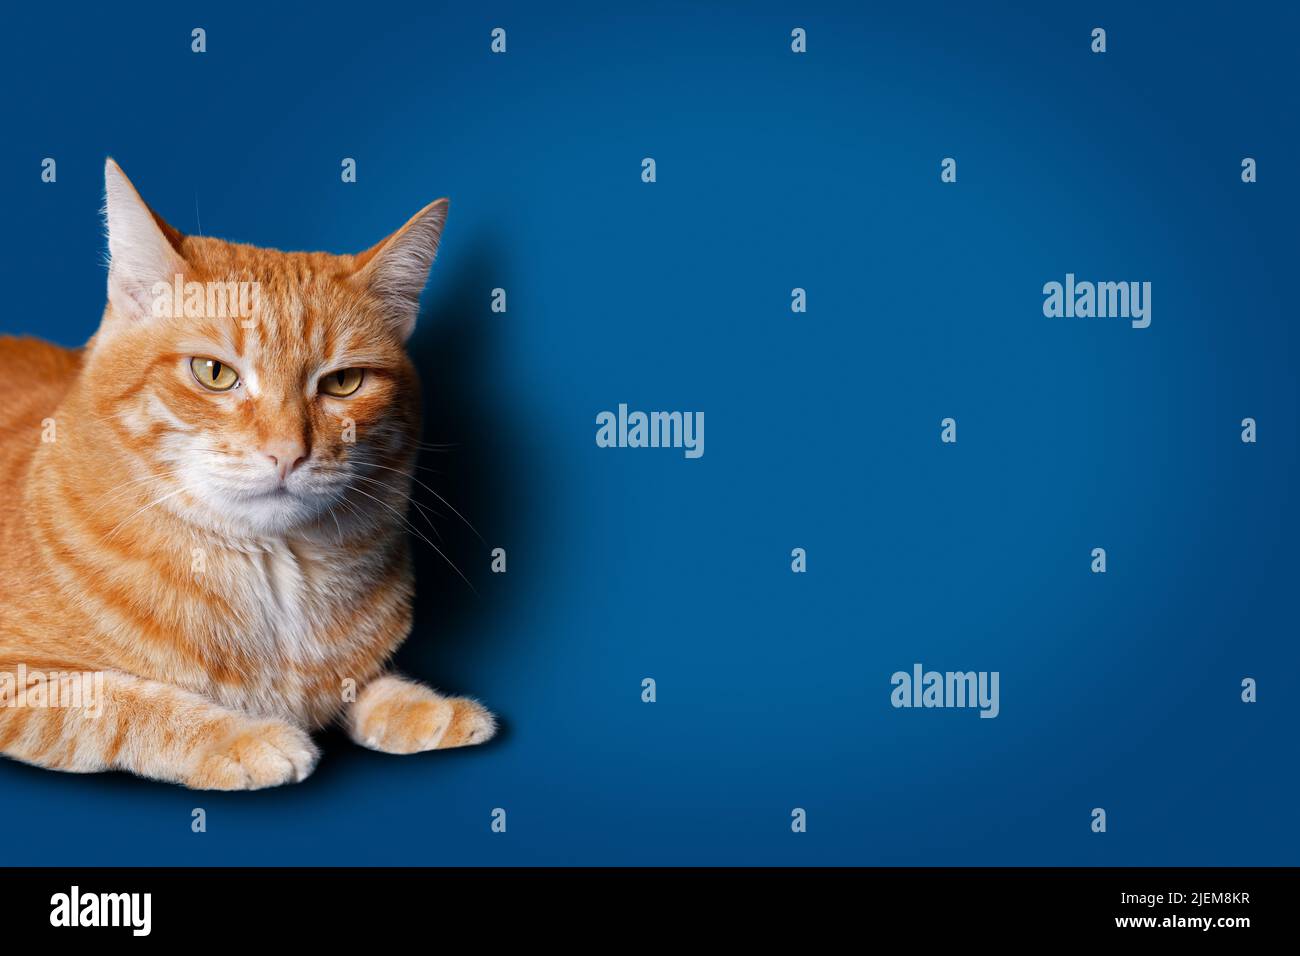 Closeup portrait of ginger cat on blue background with shadow. Copyspace. Stock Photo